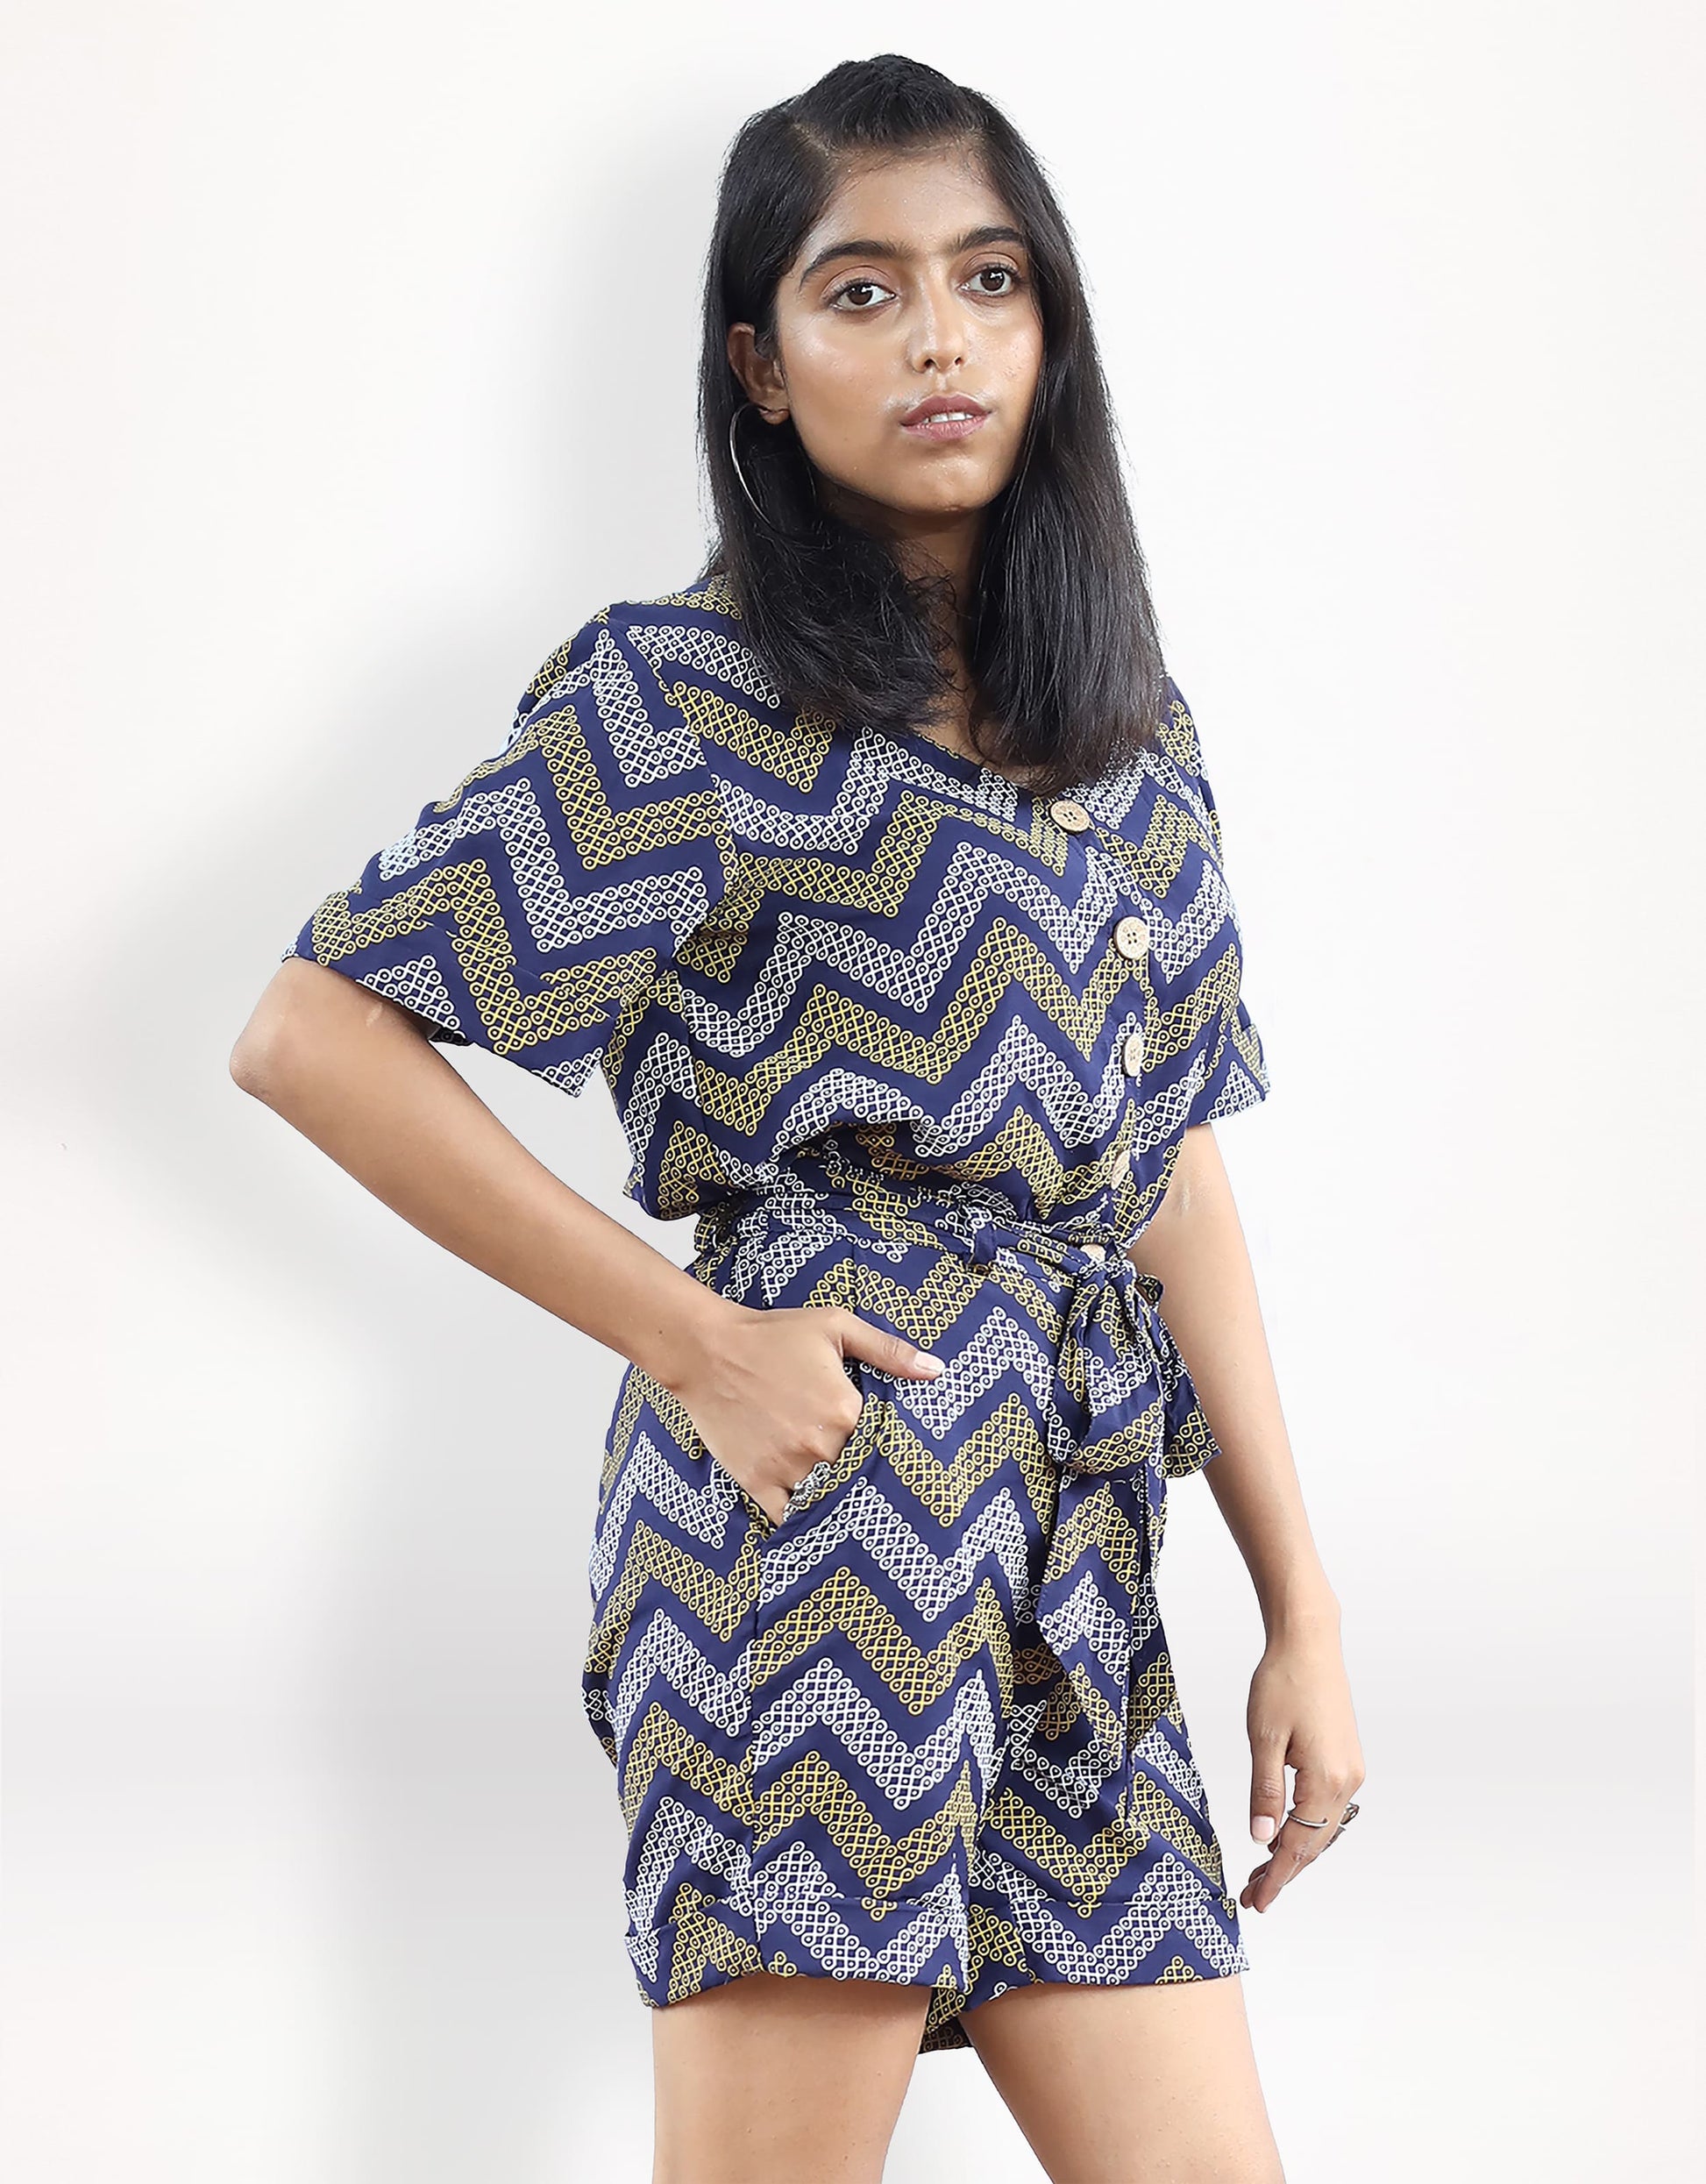 Side view of Hueloom's detachable romper in navy with kolam print and pockets.